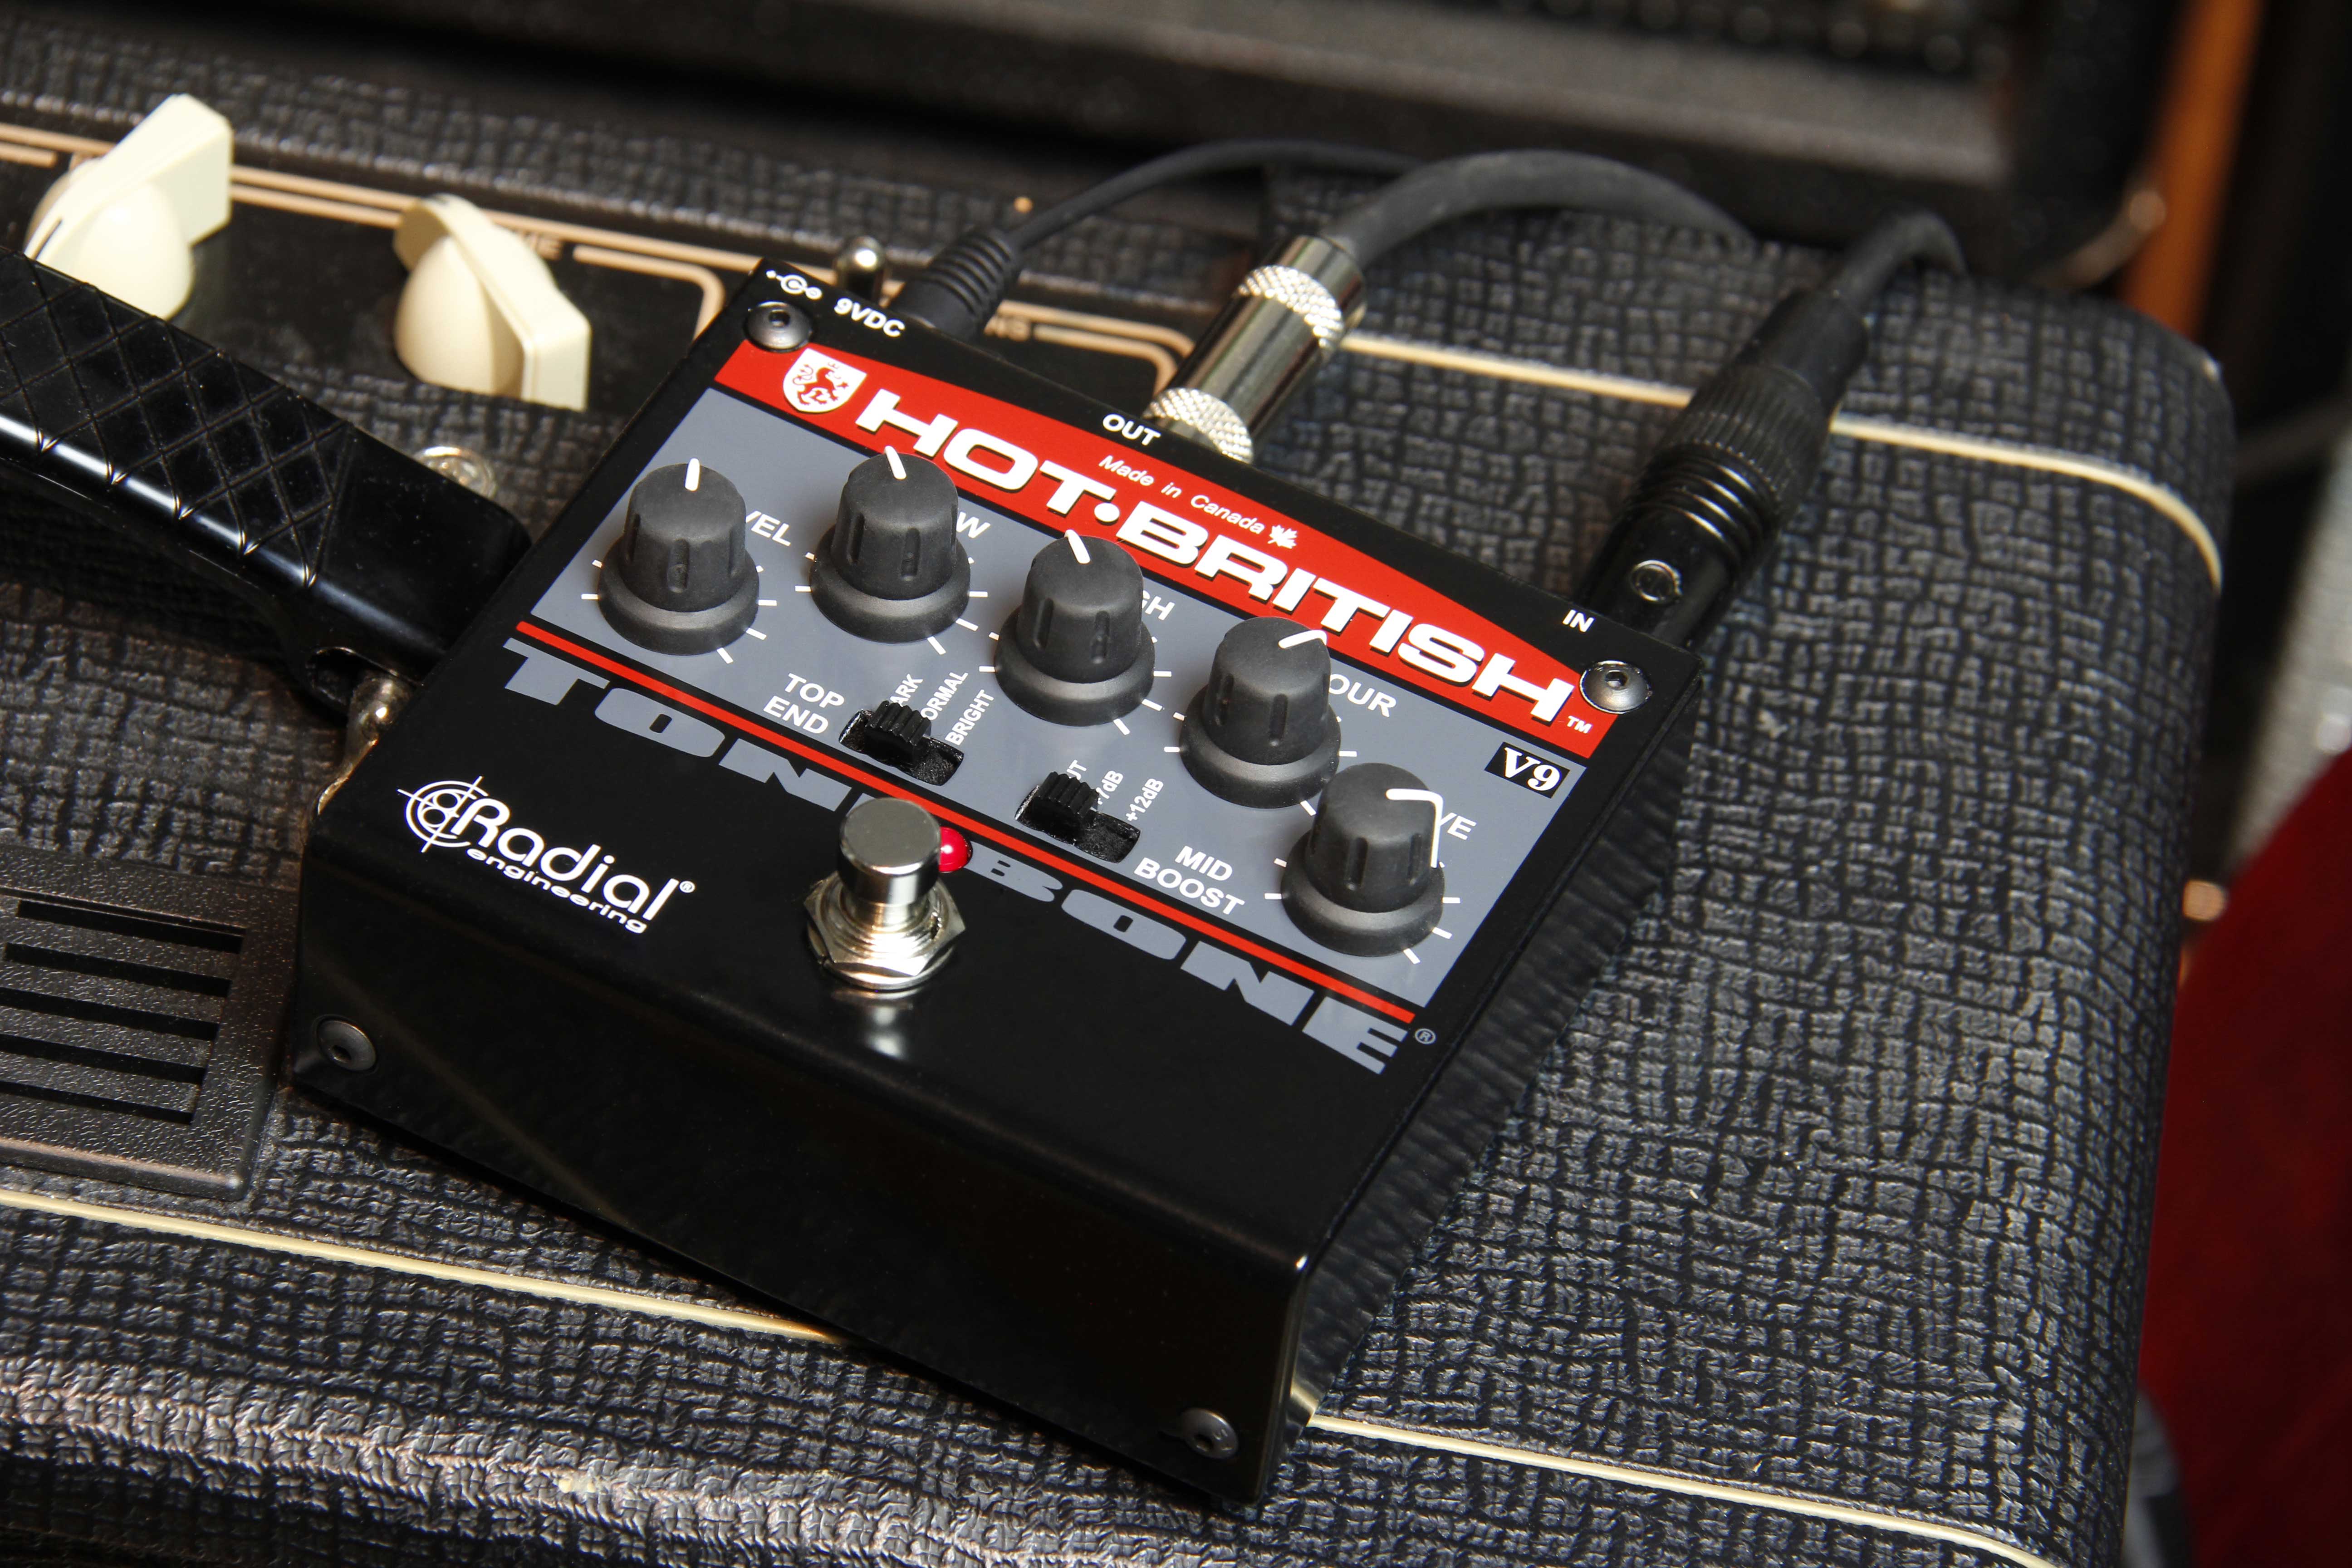 The Tonebone Hot-British V9 is now shipping! - Radial Engineering